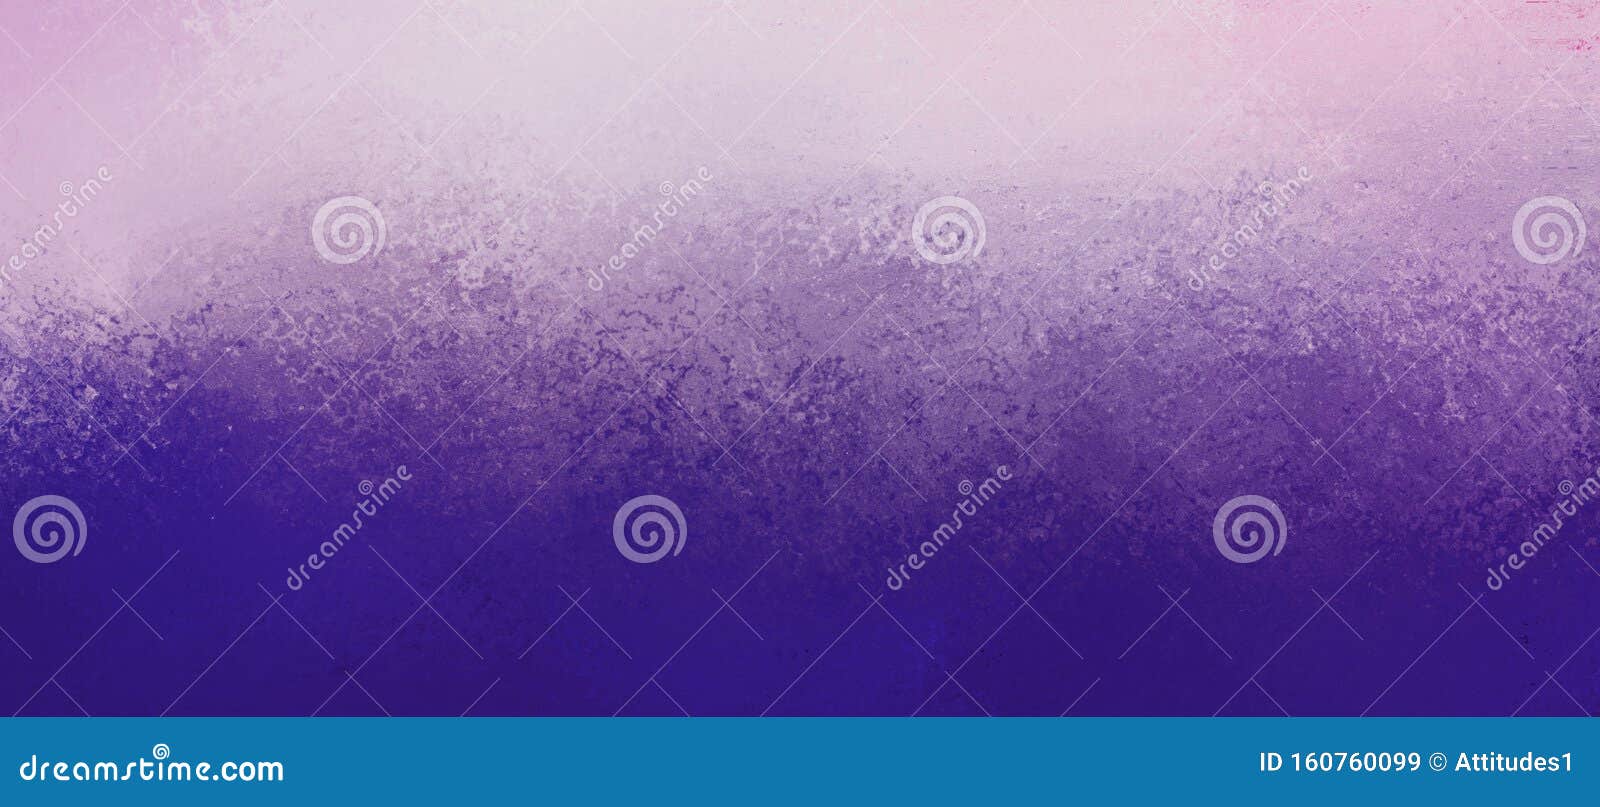 textured colors of purple and white in abstract background, faded old vintage grunge texture and foggy hazy top border